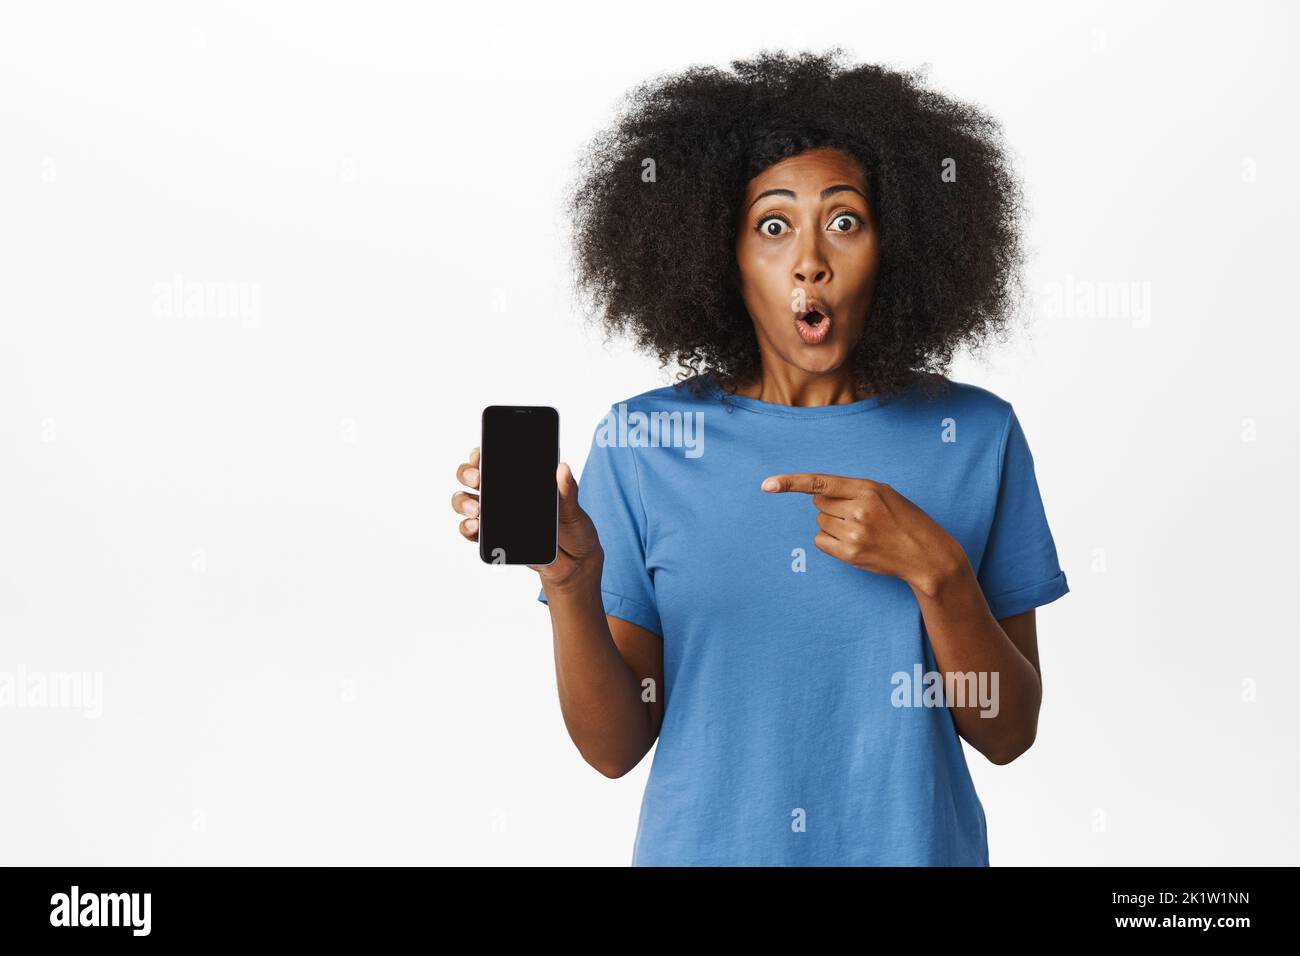 Portrait of amazed and surprised Black woman pointing finger at mobile phone screen, showing smartphone application with enthusiastic face, white back Stock Photo